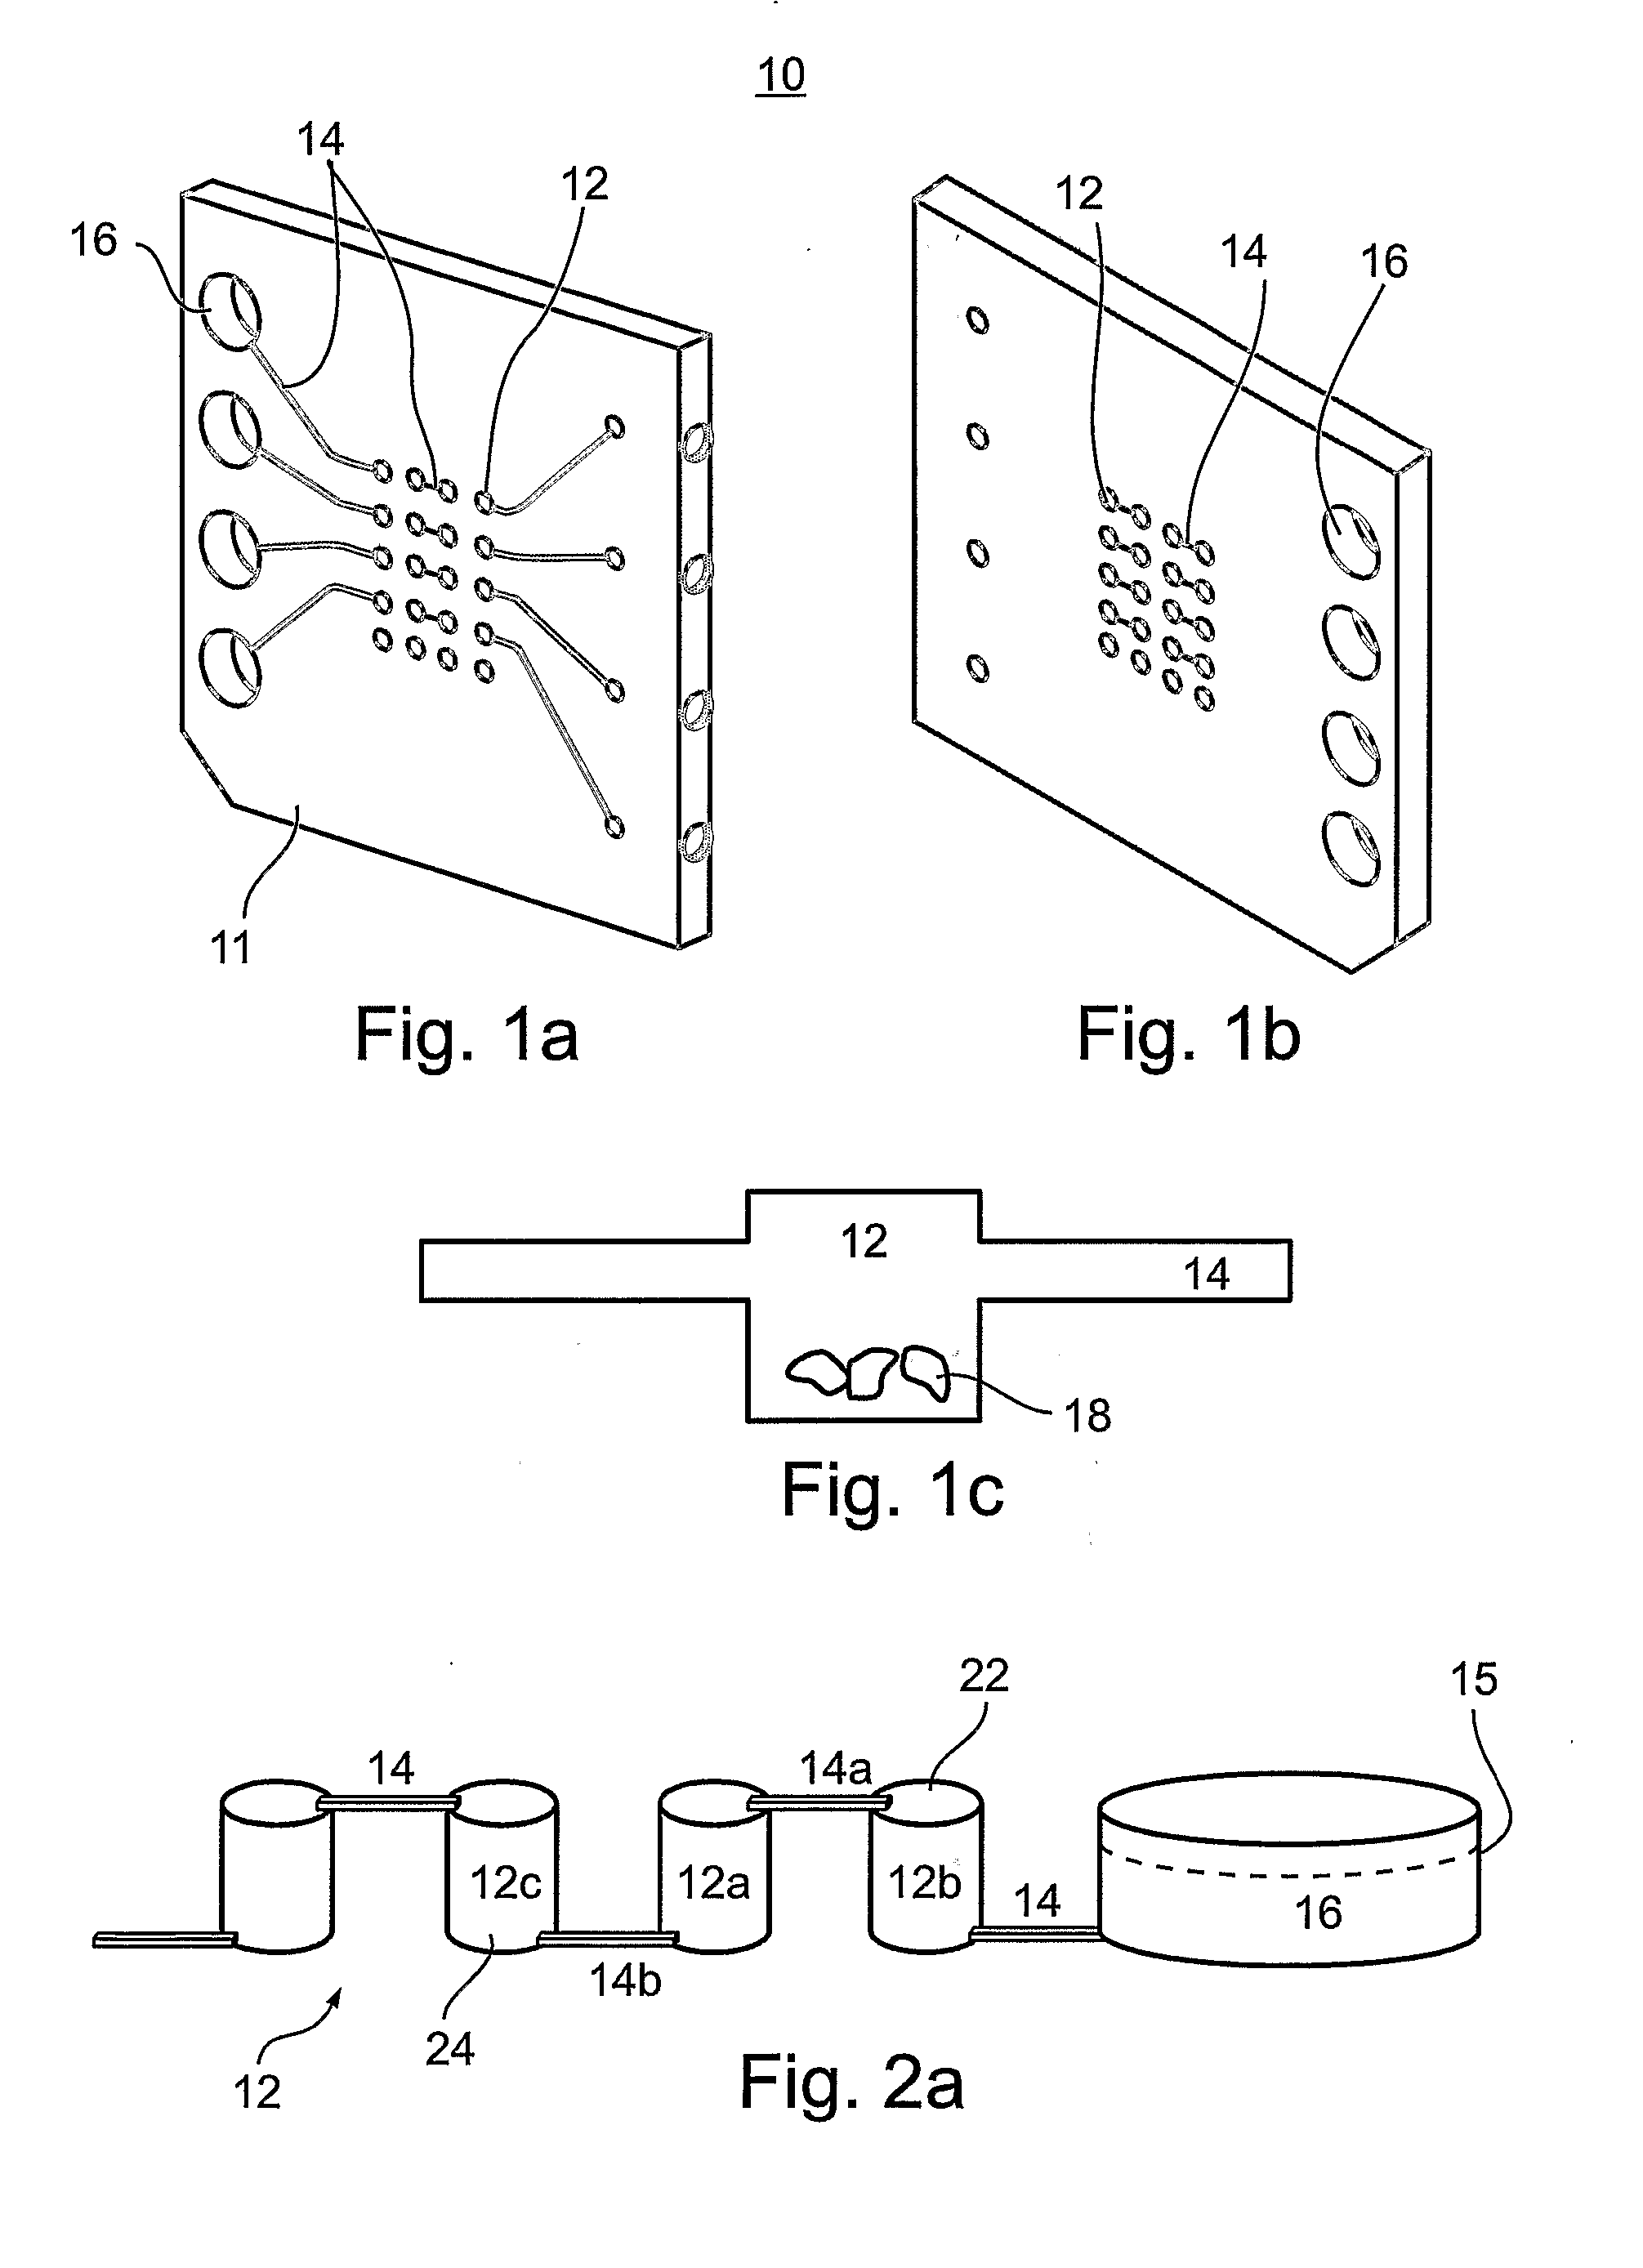 Method and System for Detecting Analytes